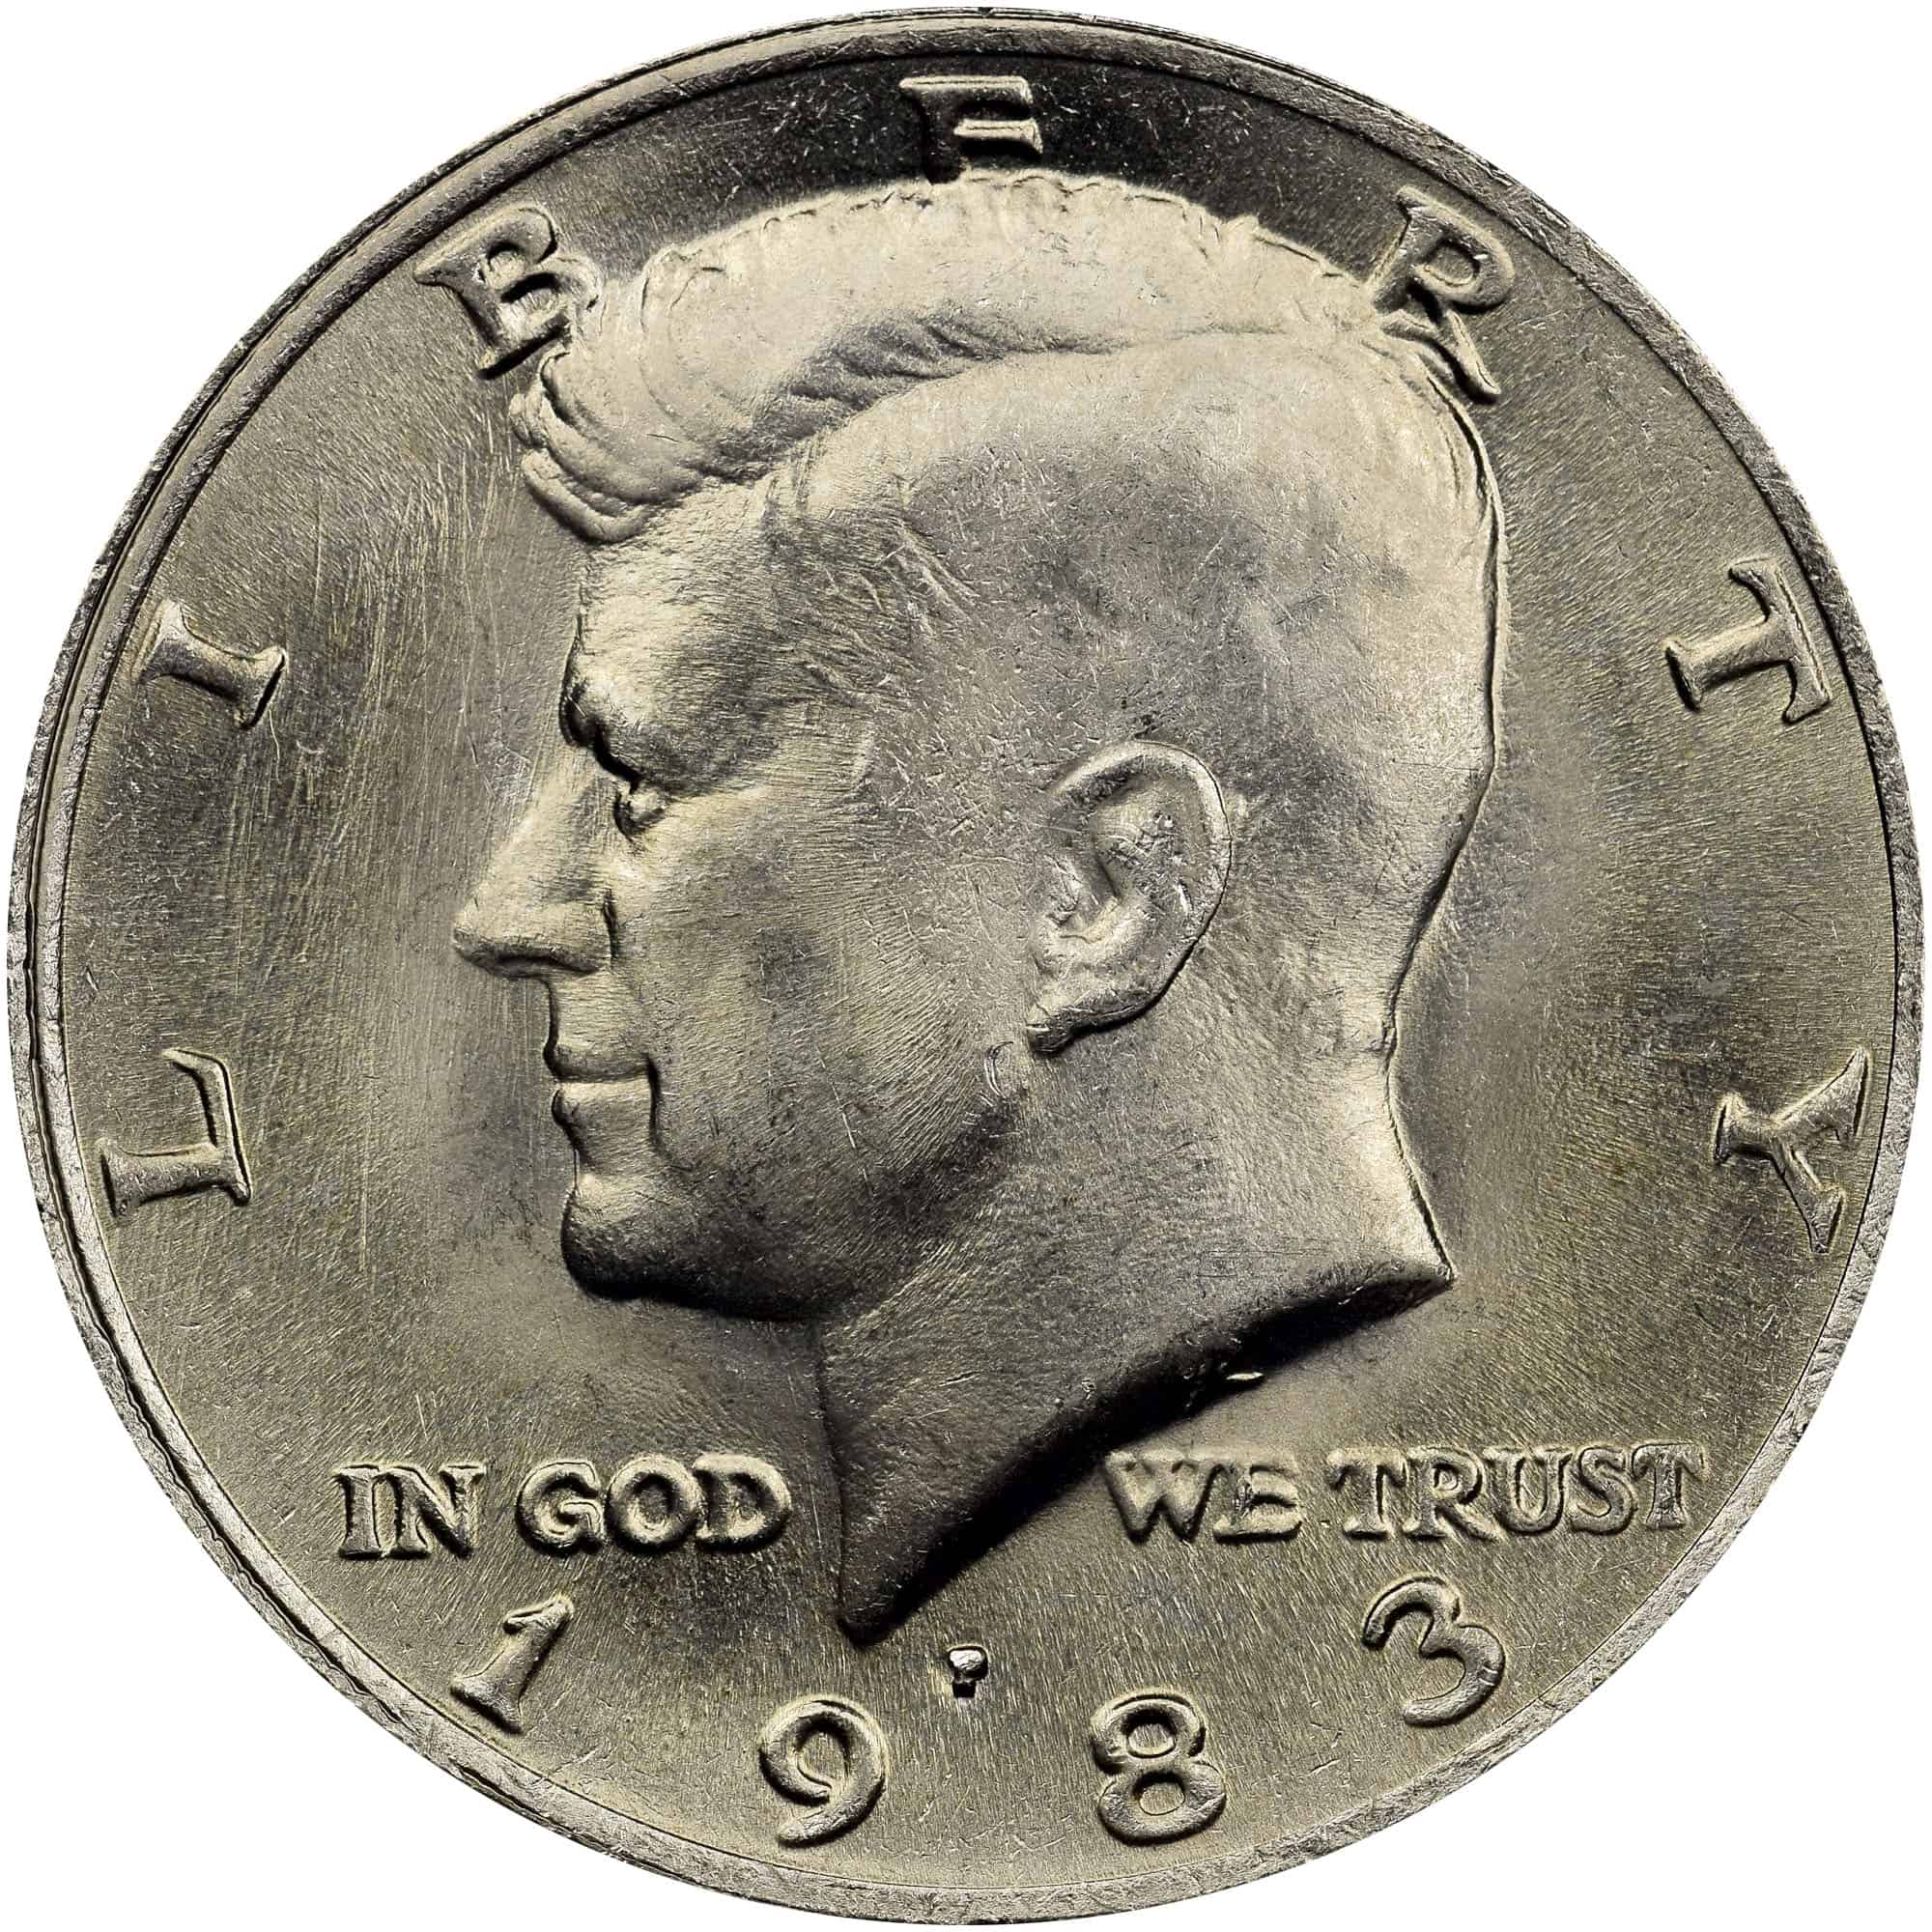 The Obverse of the 1983 Half Dollar